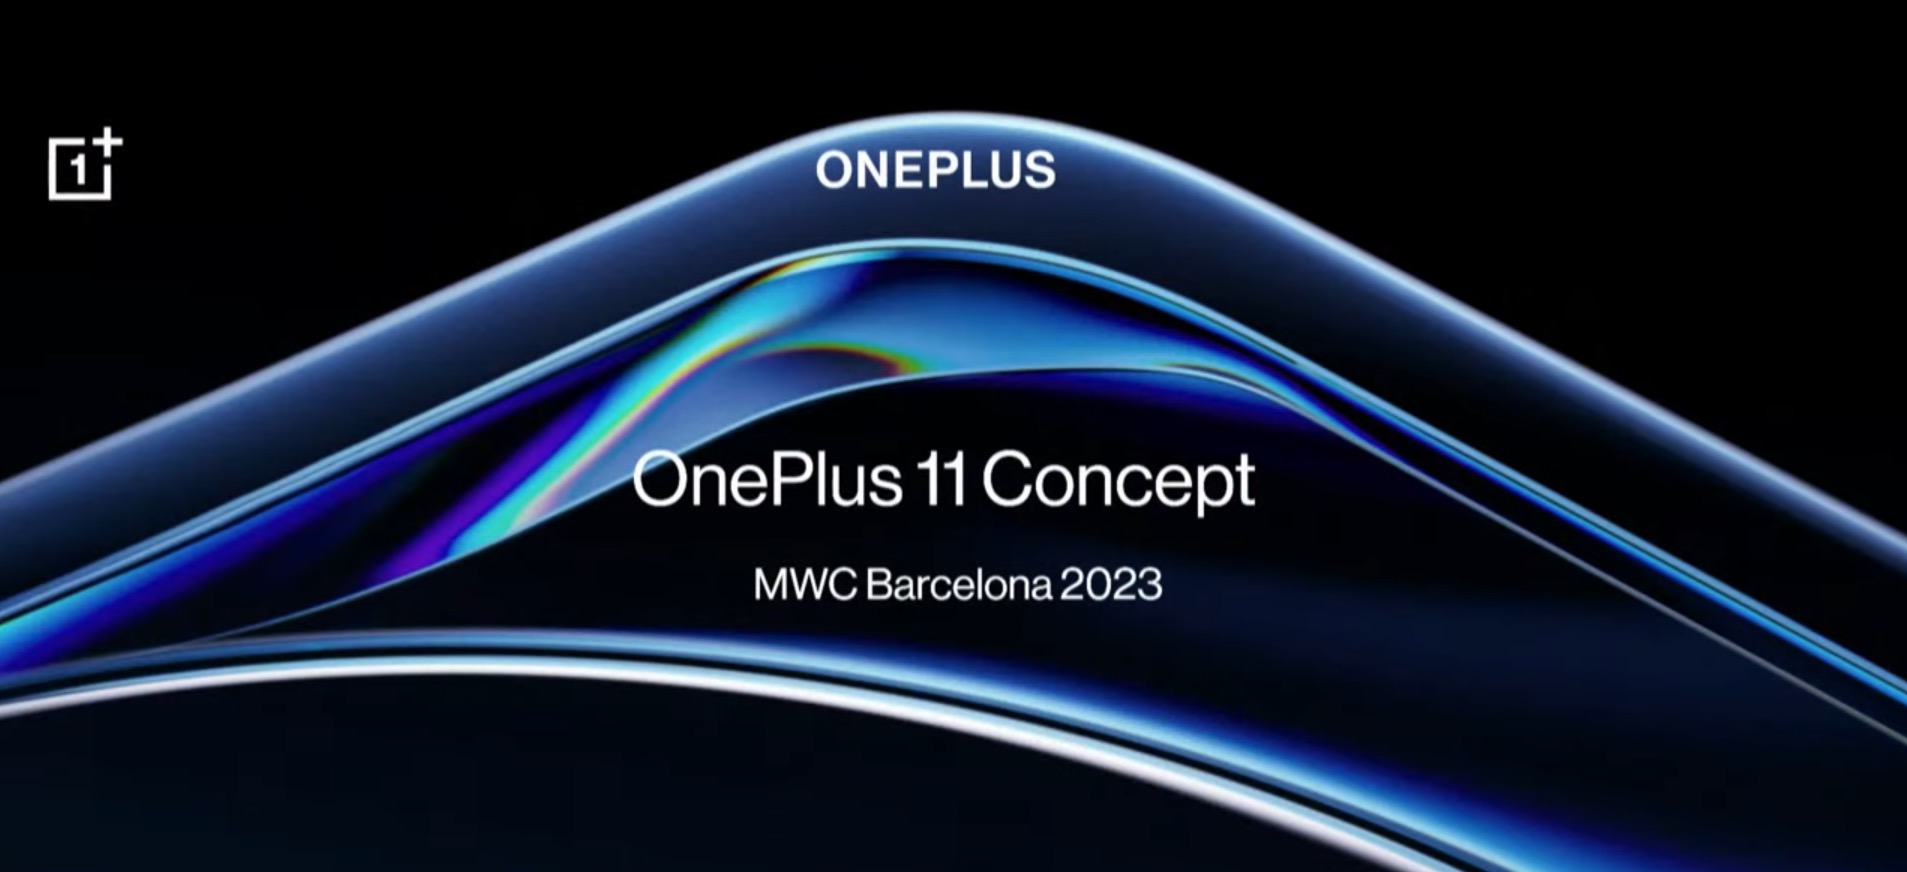 OnePlus unveils smartphone with innovative future technology at MWC 2023